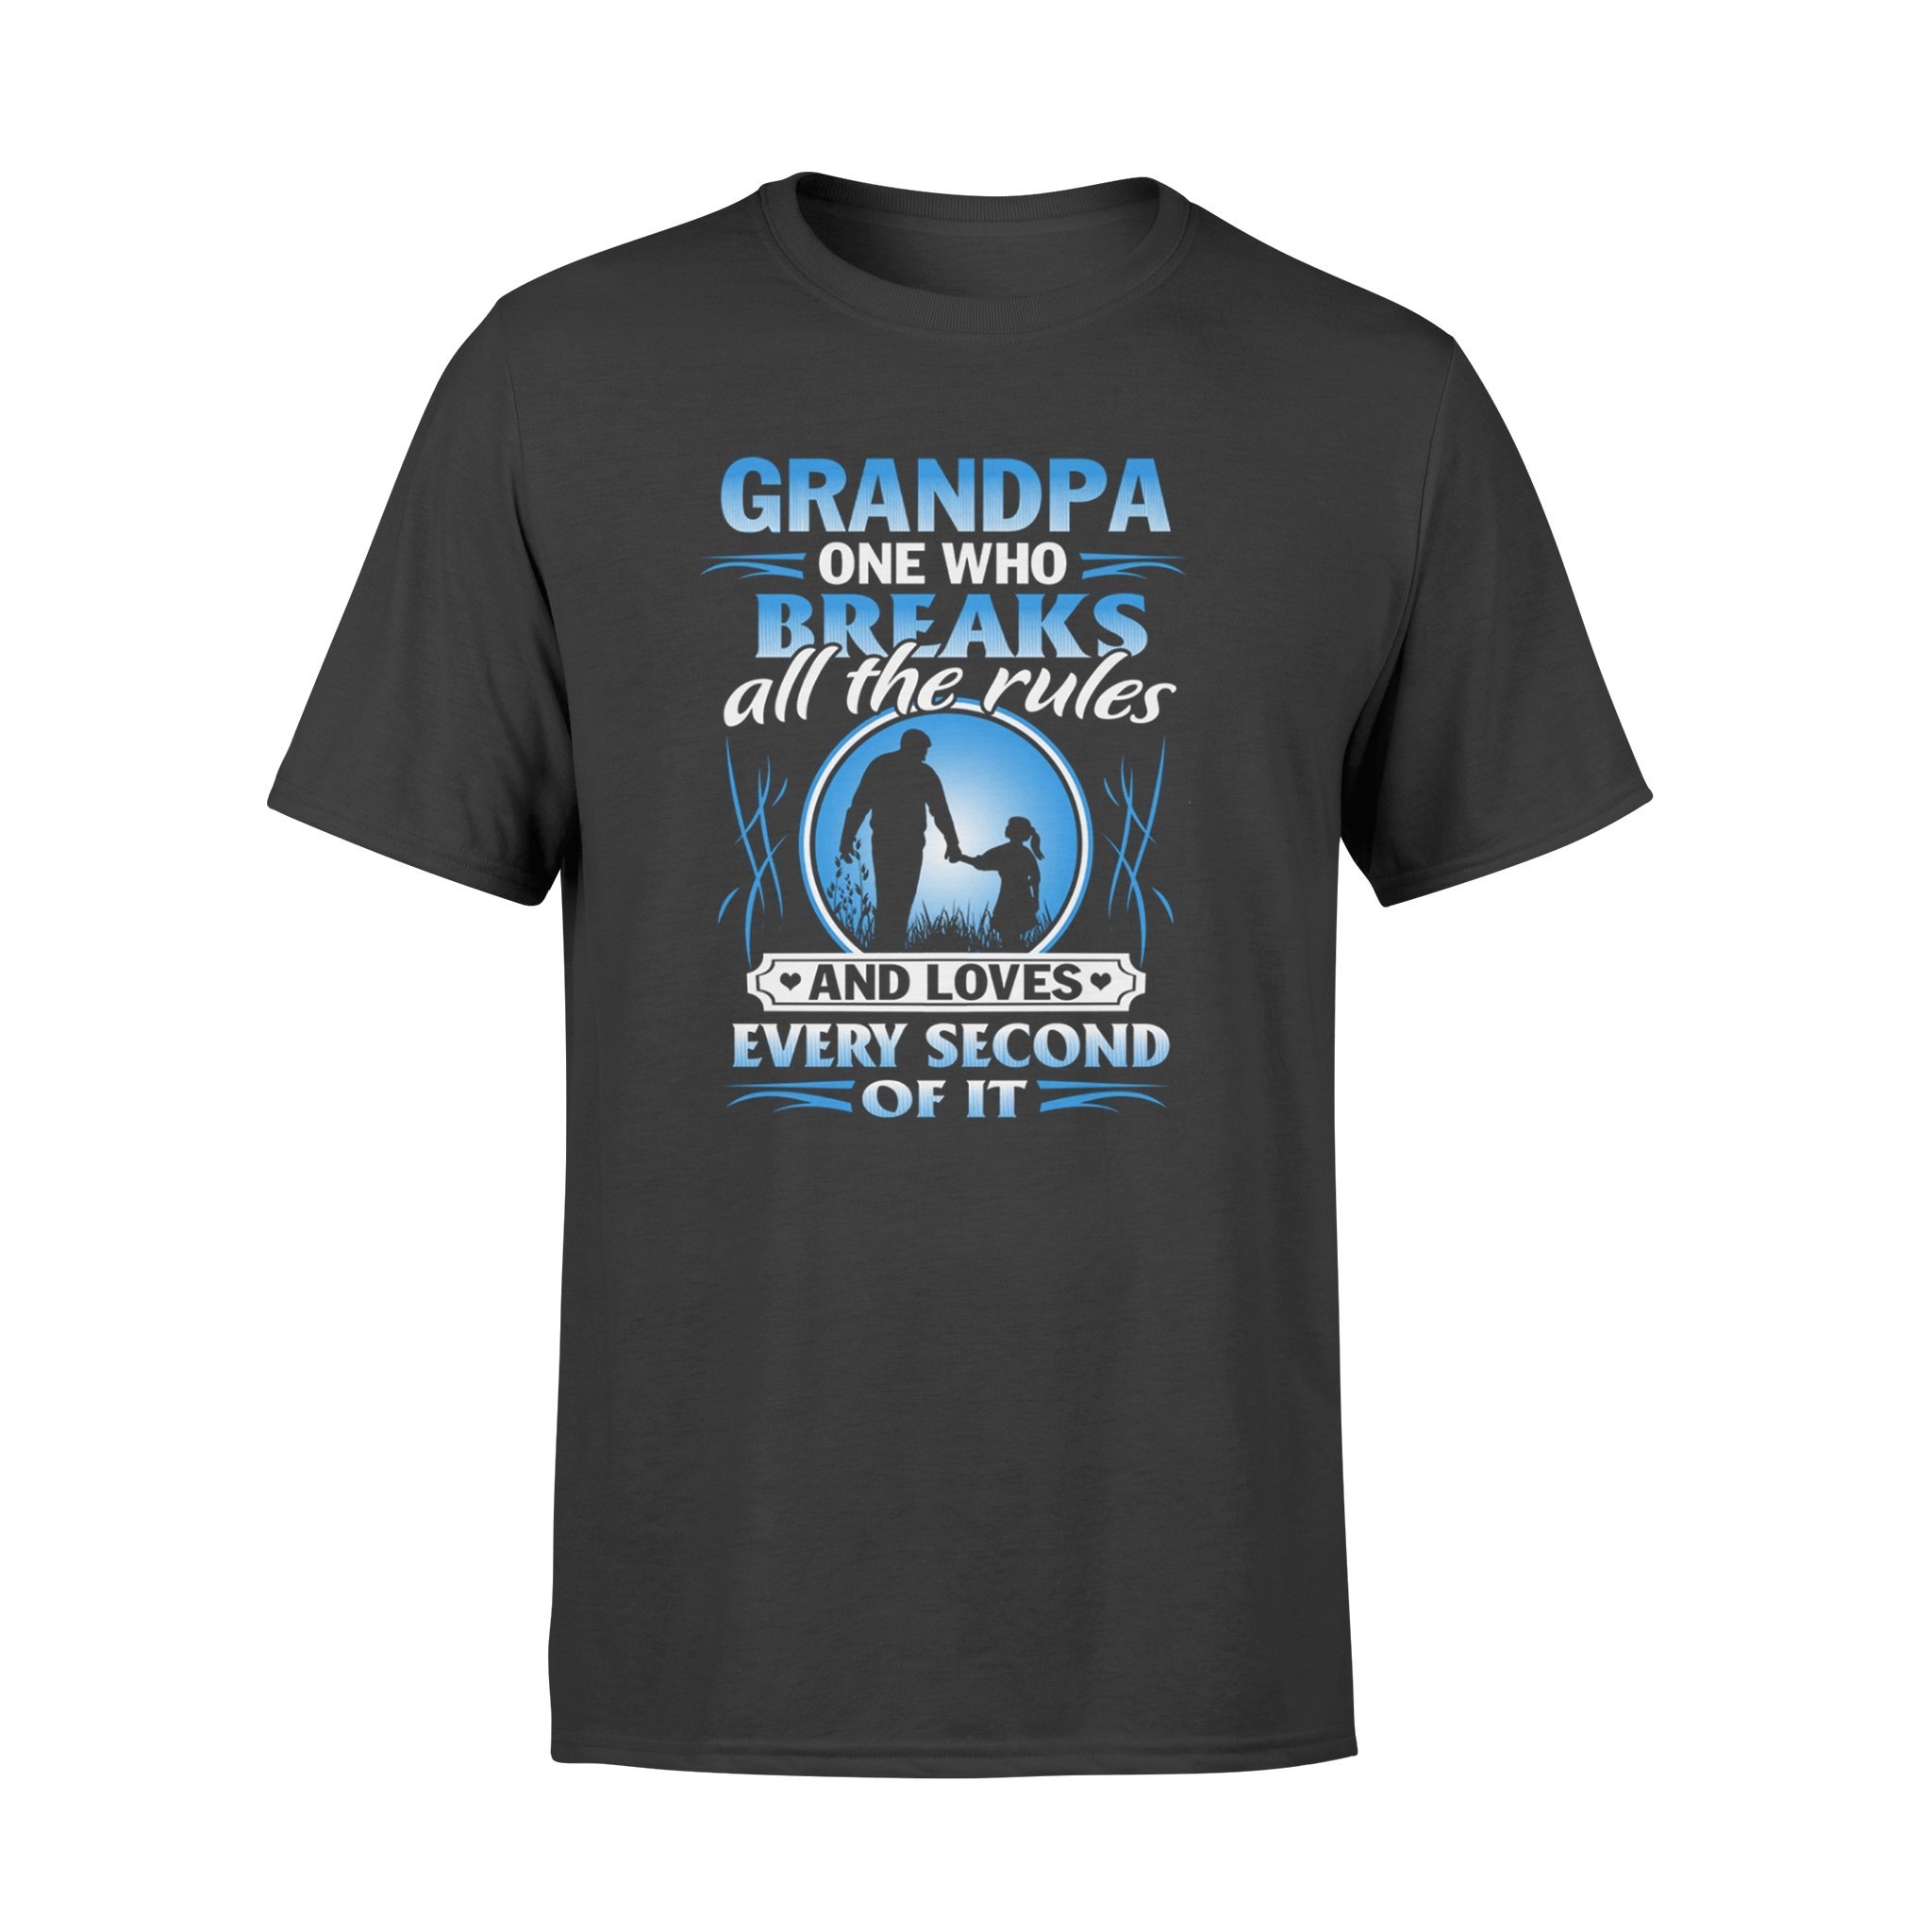 breaks all the rules T shirt ? Gifts for grandpa